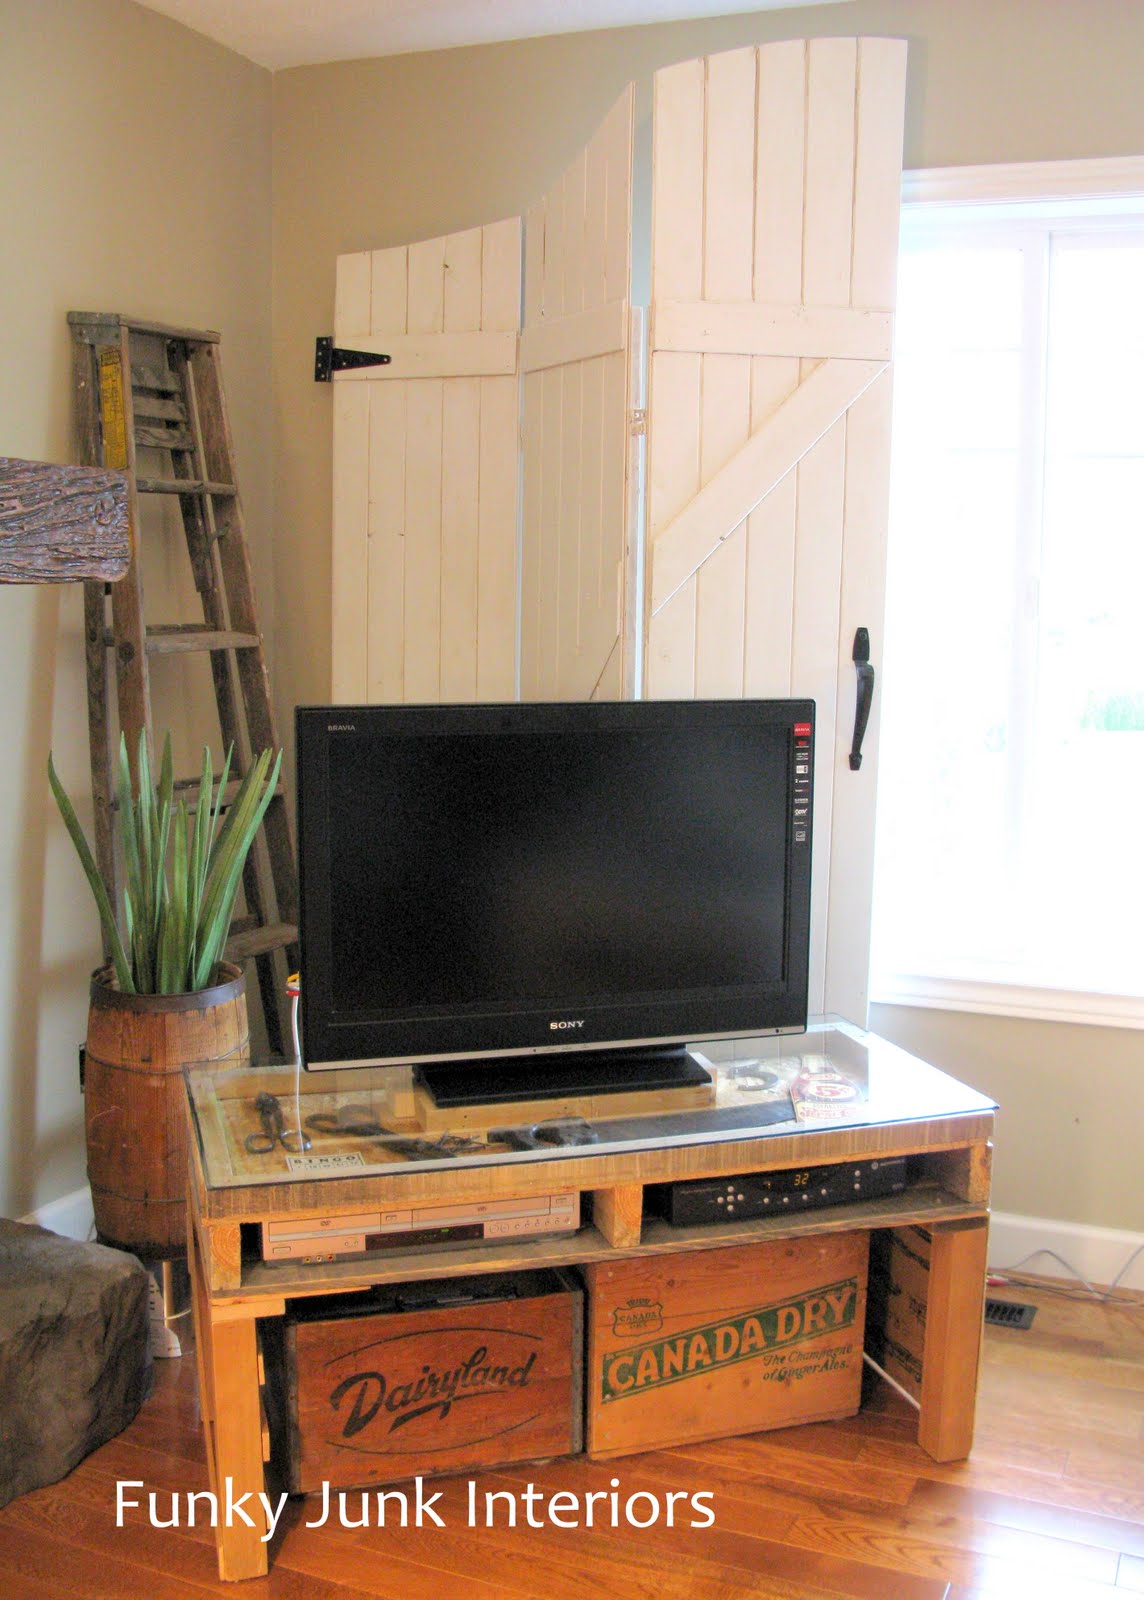 new TV stand made from a palletFunky Junk Interiors